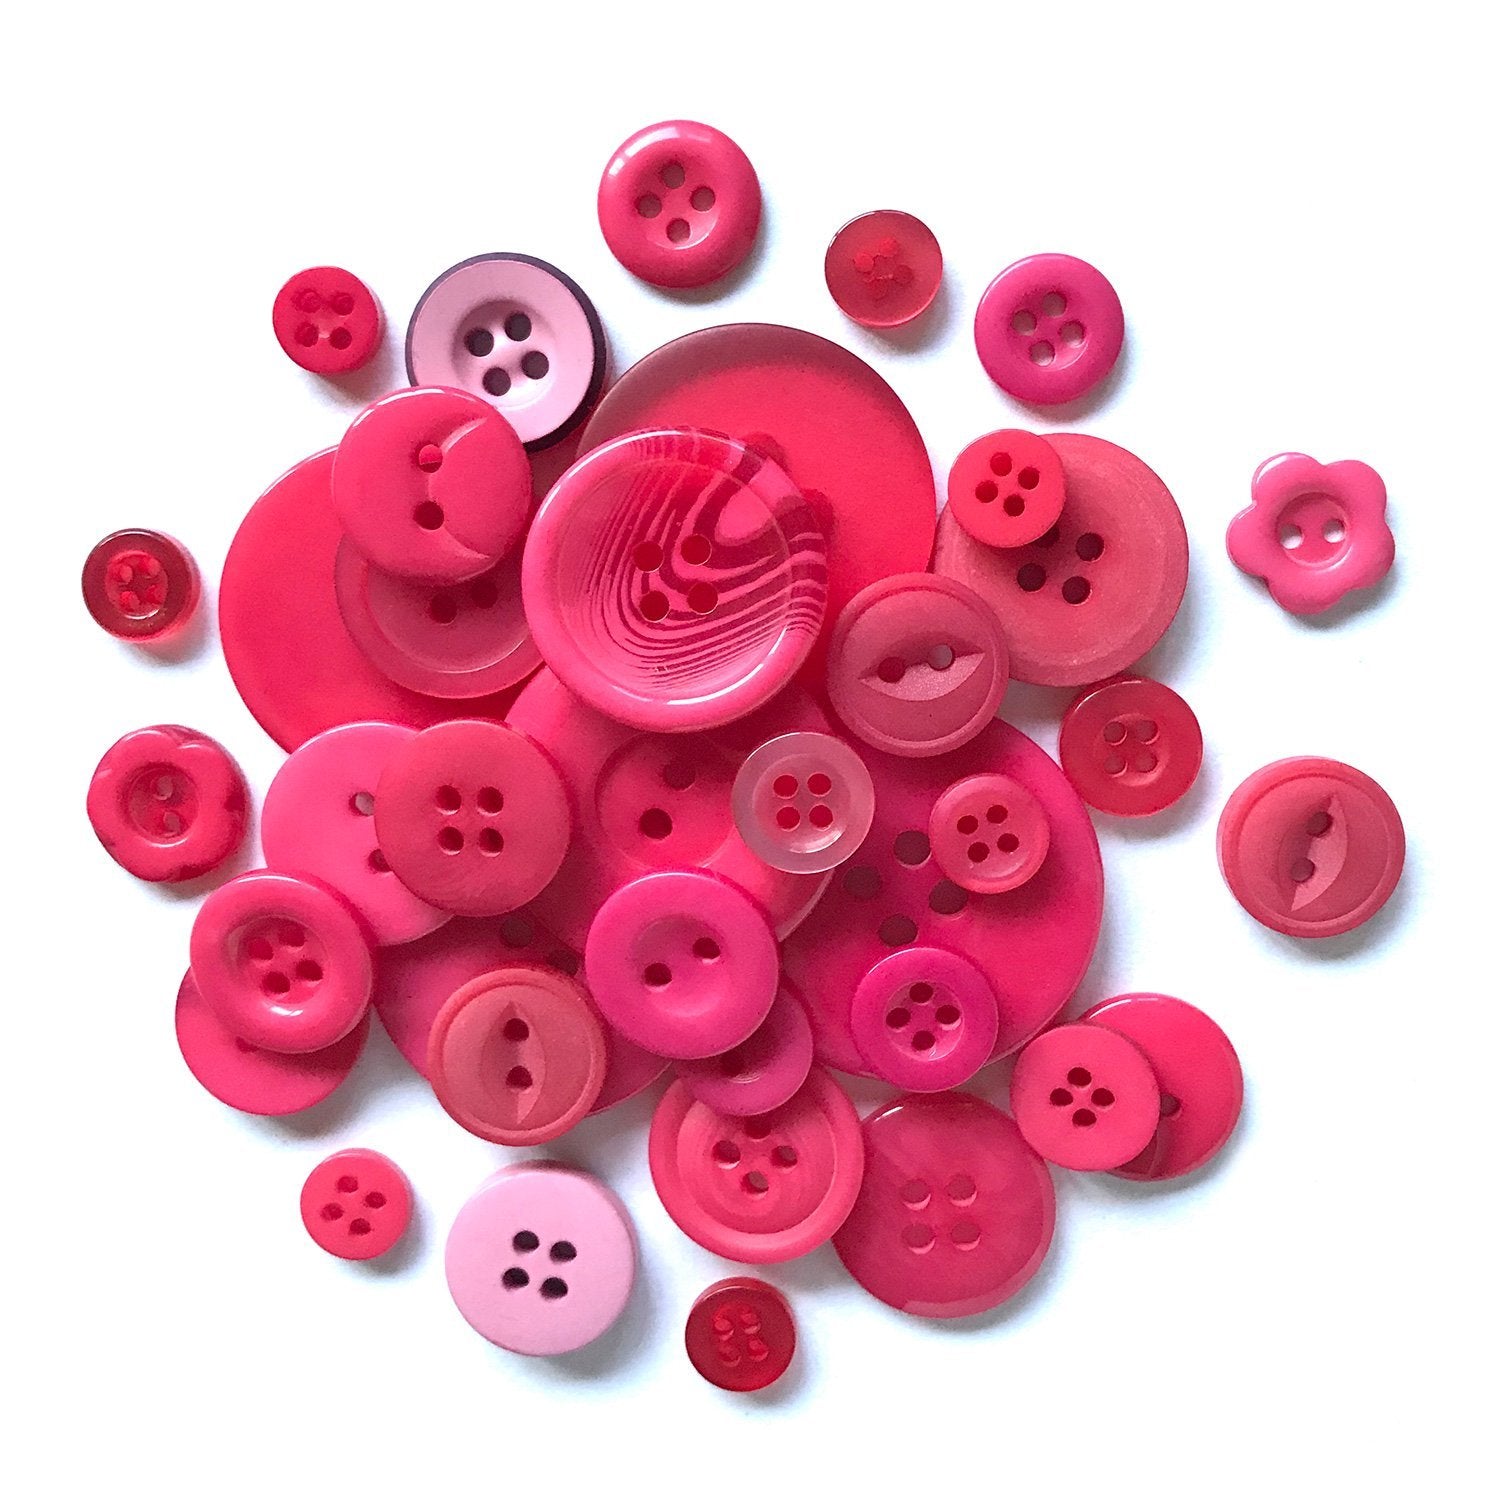 Bright pink Buttons for Crafts Sewing Scrapbooks and Quilts